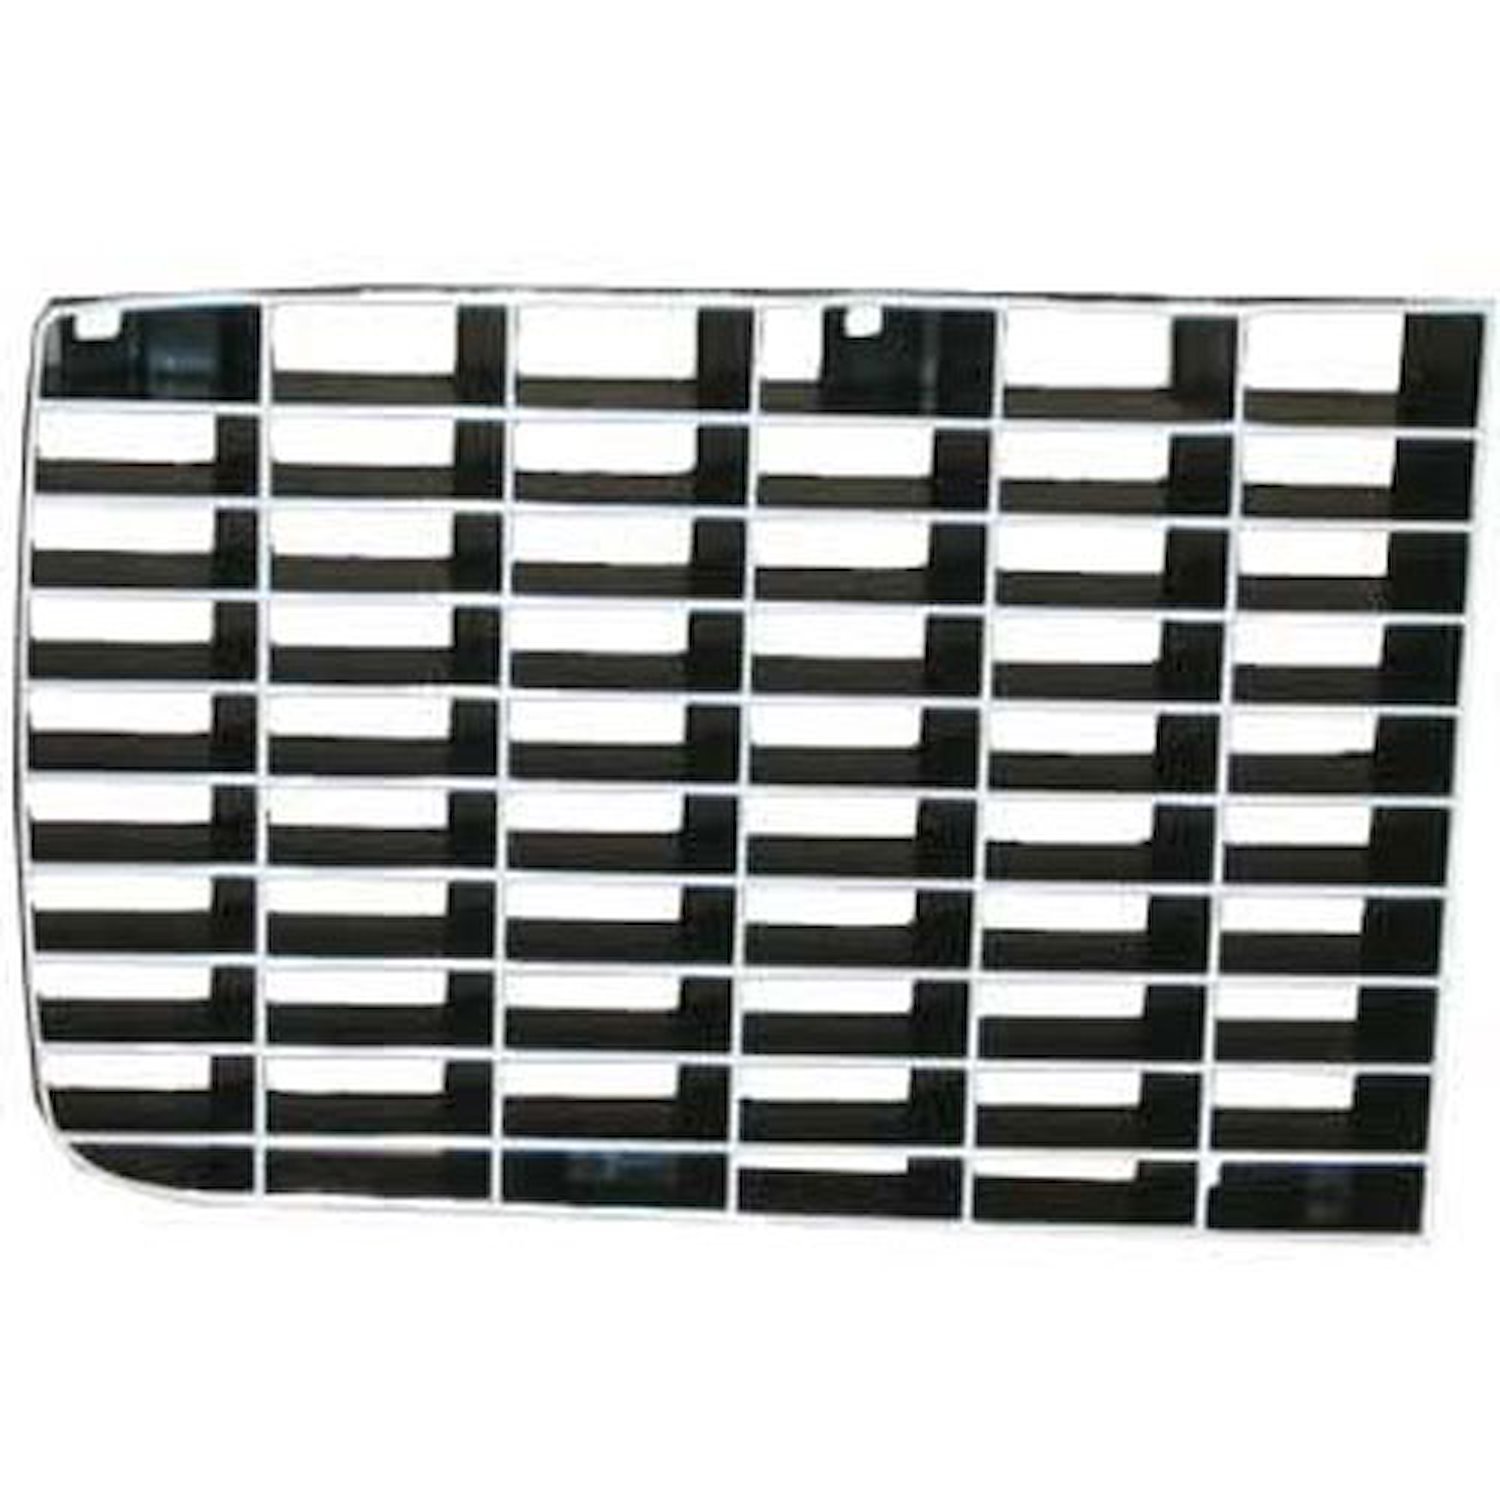 GR01-703R Grille 1970-1973 Chevy Camaro, Black, RH, Fits RS Models Only